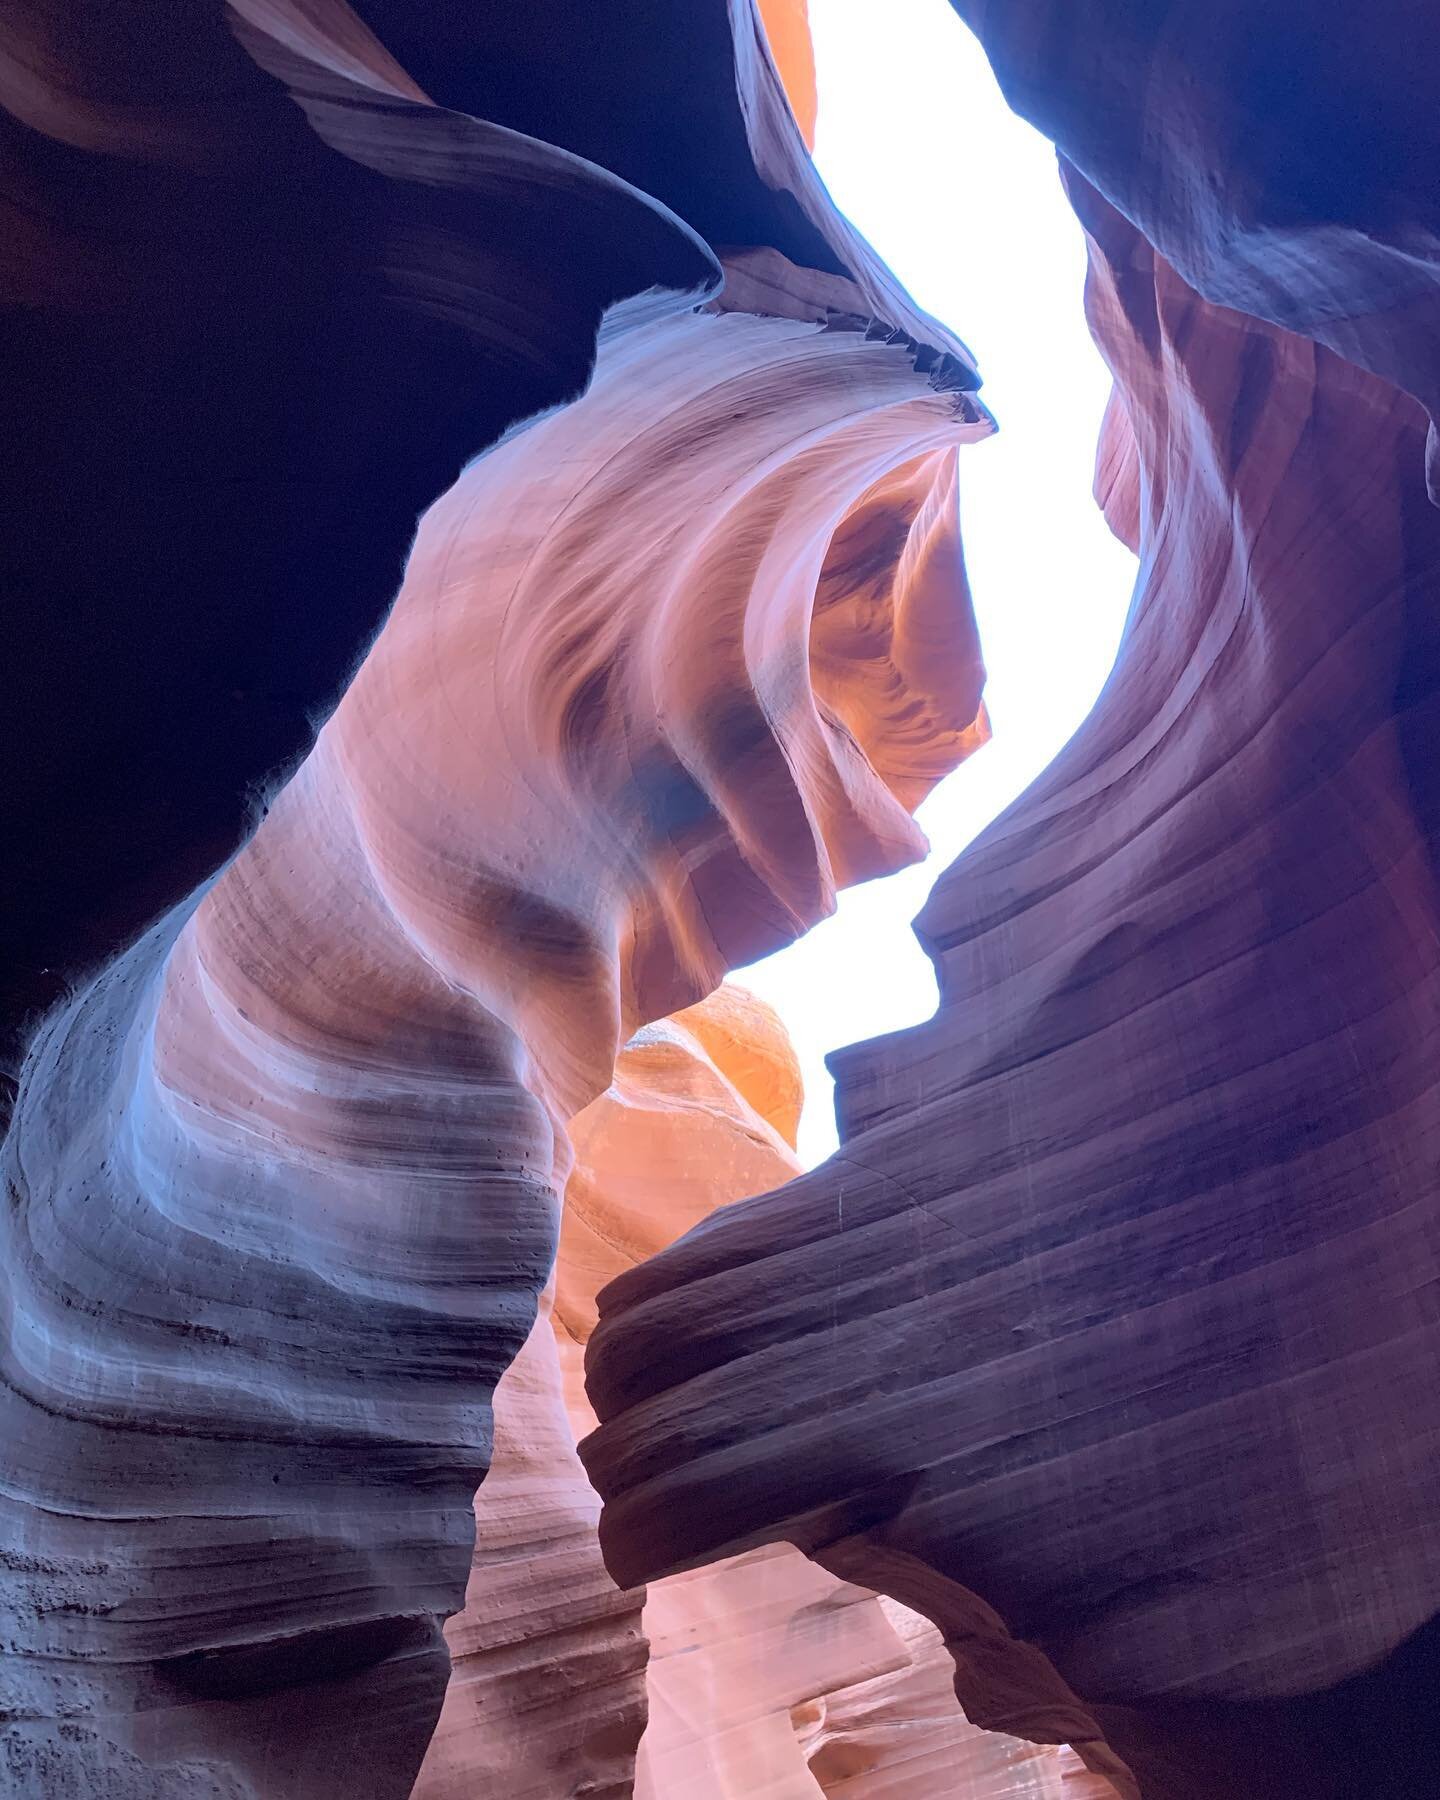 They say a picture is worth a thousand words. Even though I&rsquo;m a writer and not a photographer, I still think these photos of the breathtaking Lower Antelope Canyon are worth more than a million of my words. Absolutely incredible natural beauty.